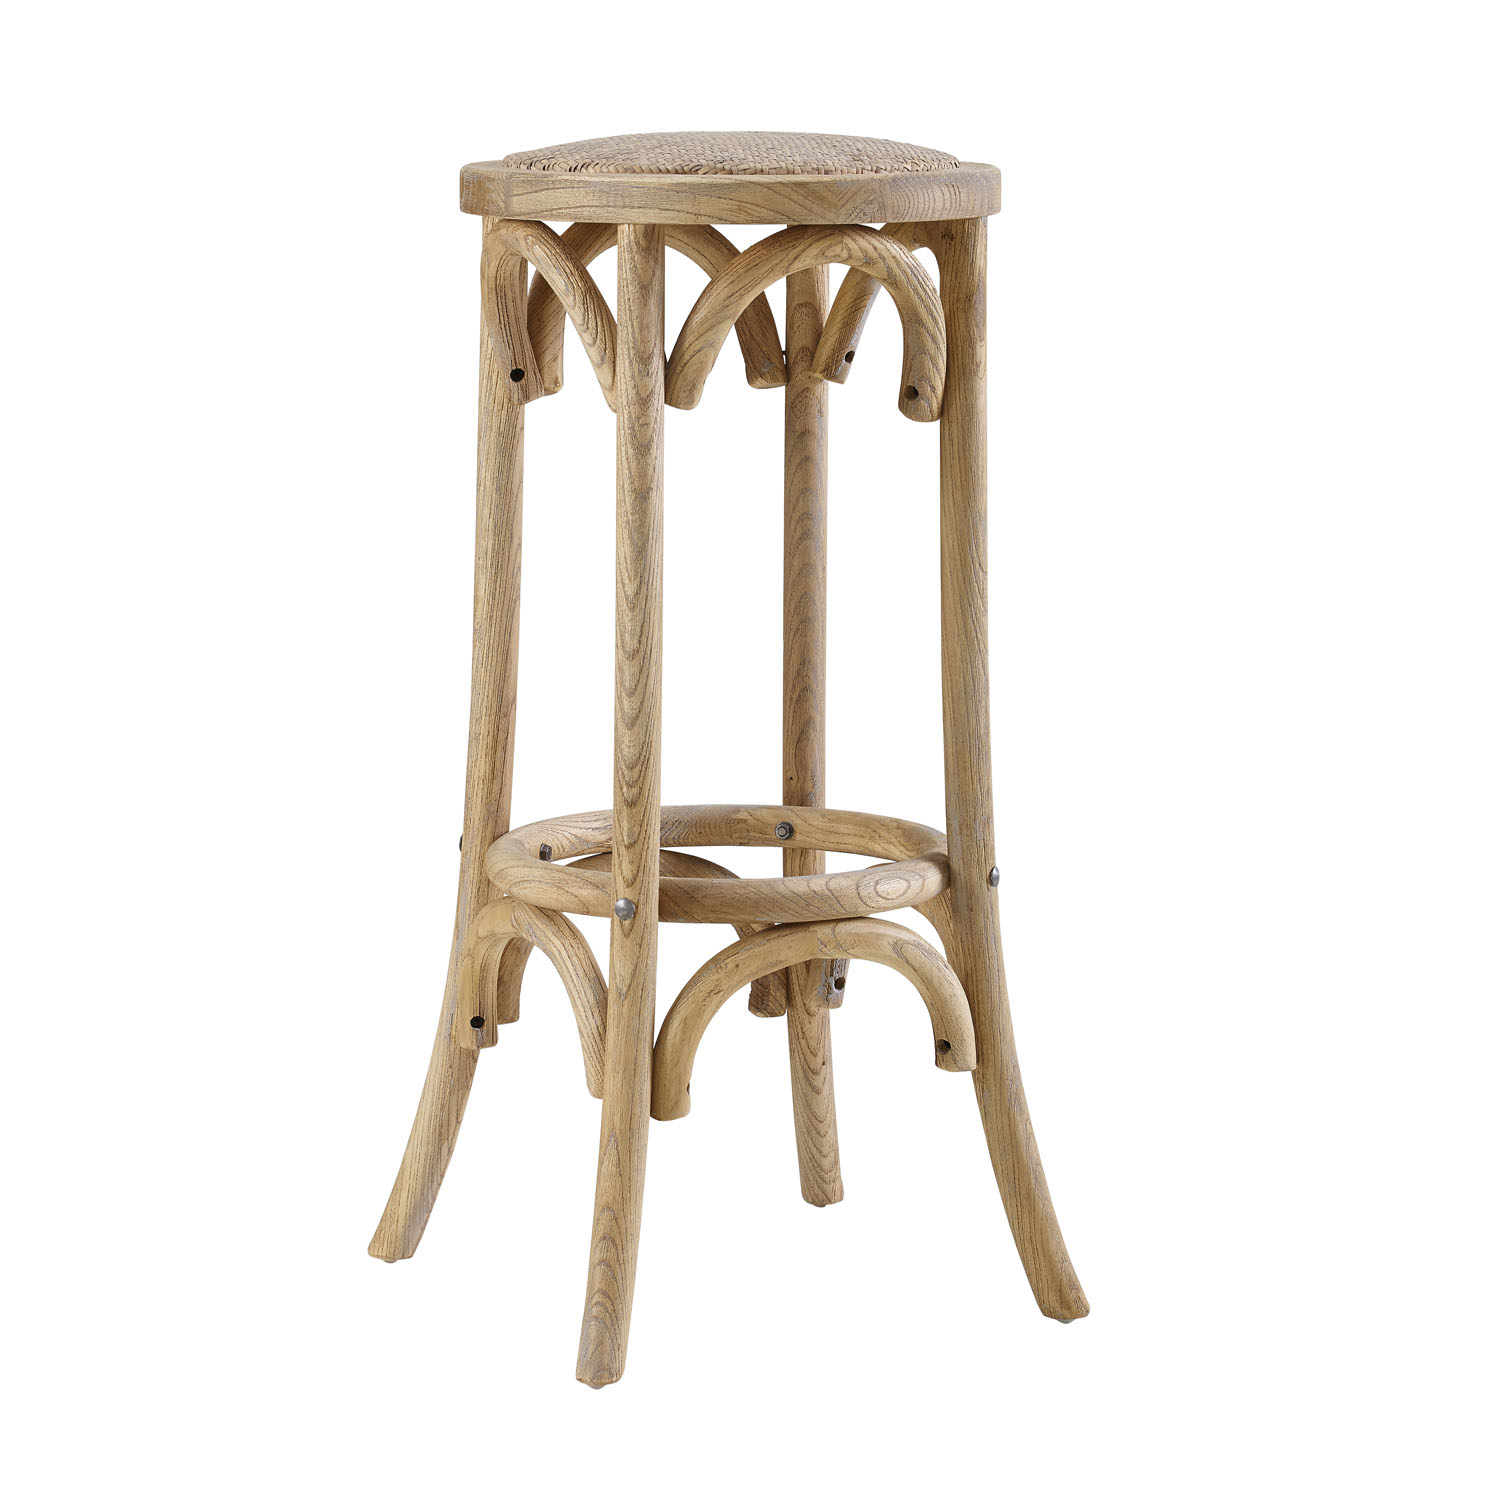 Linon Rae Backless Wood Bar Stool, 30" Seat Height, Brown Finish - image 2 of 3